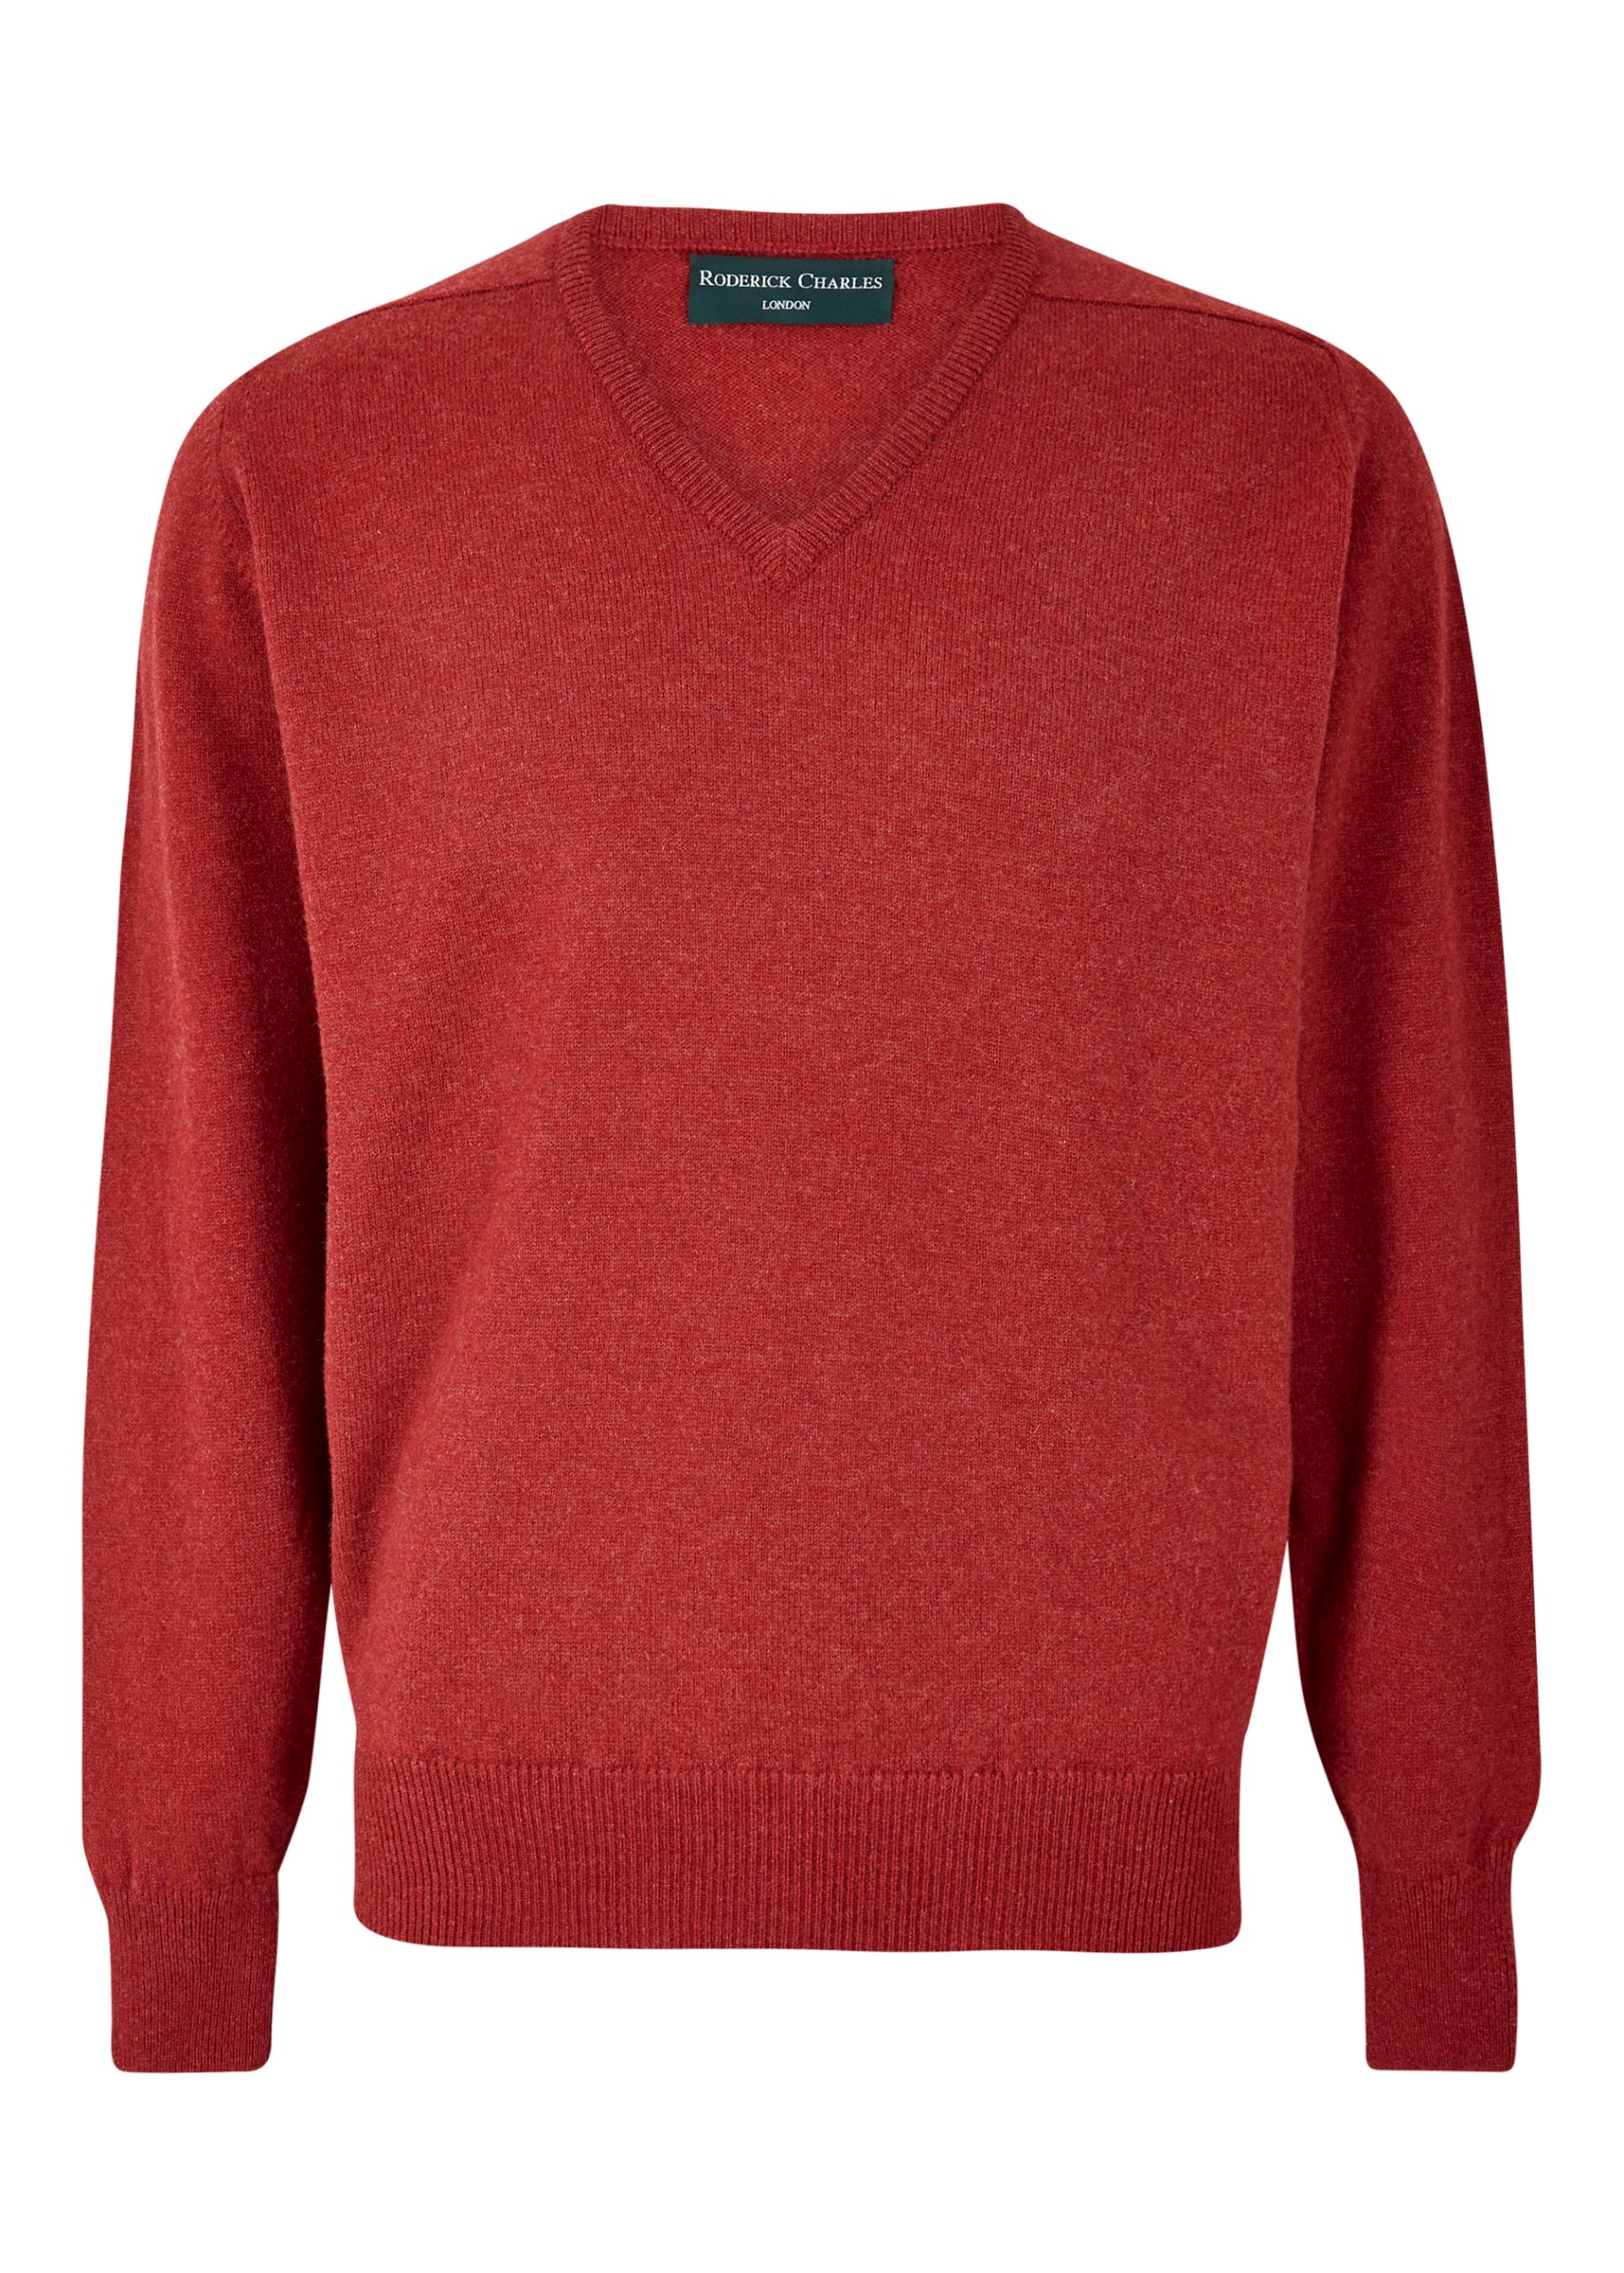 Lambswool v neck sweater in the colour poppy